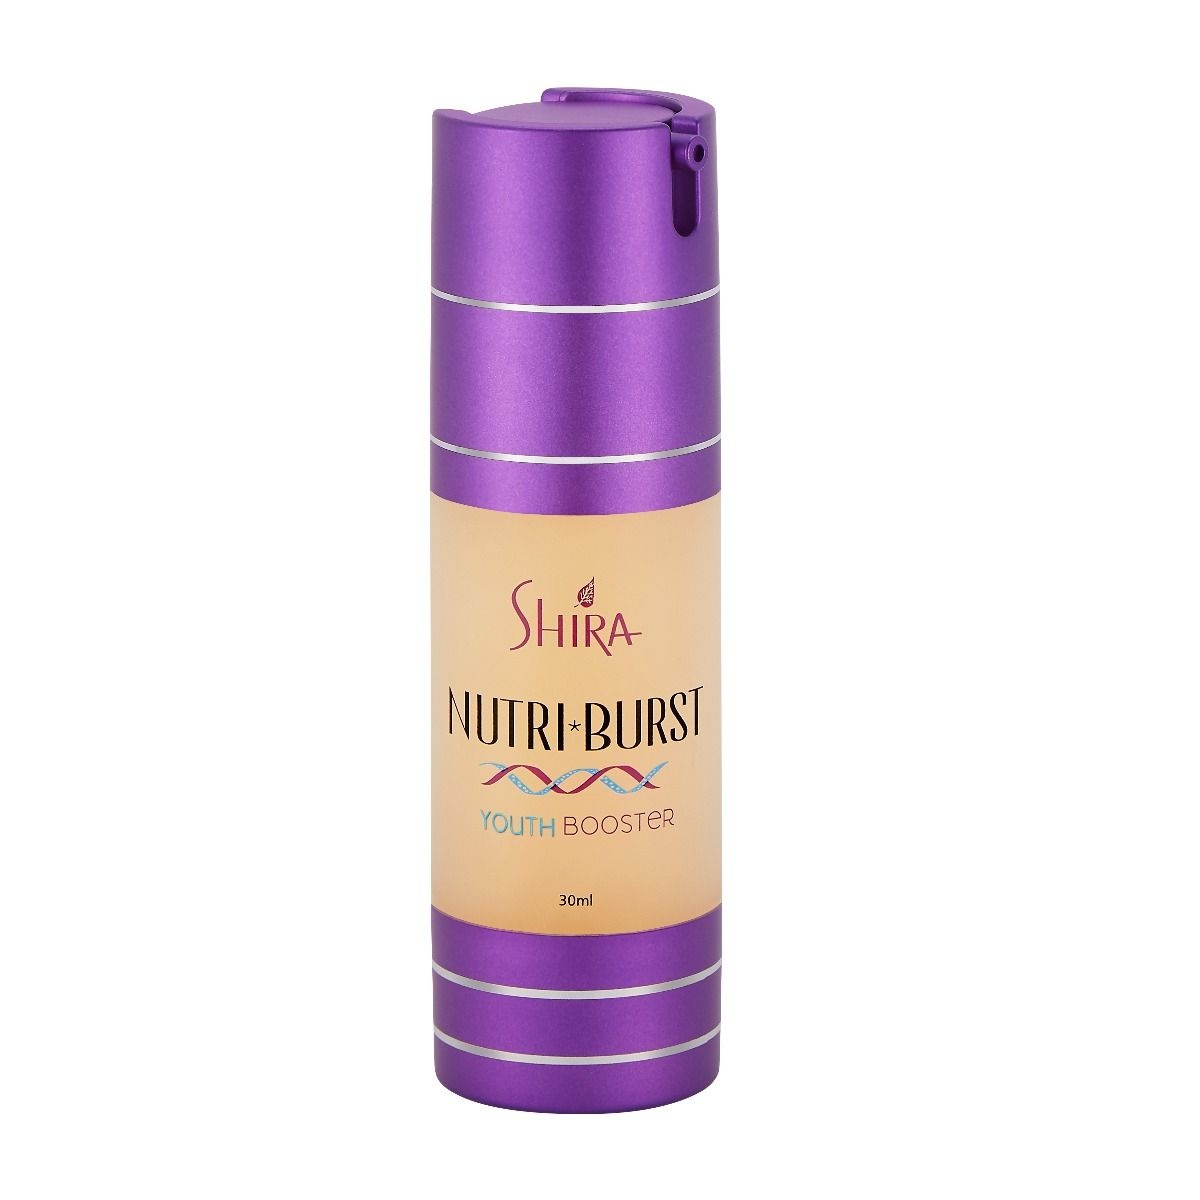 Shira Nutriburst Youth Booster